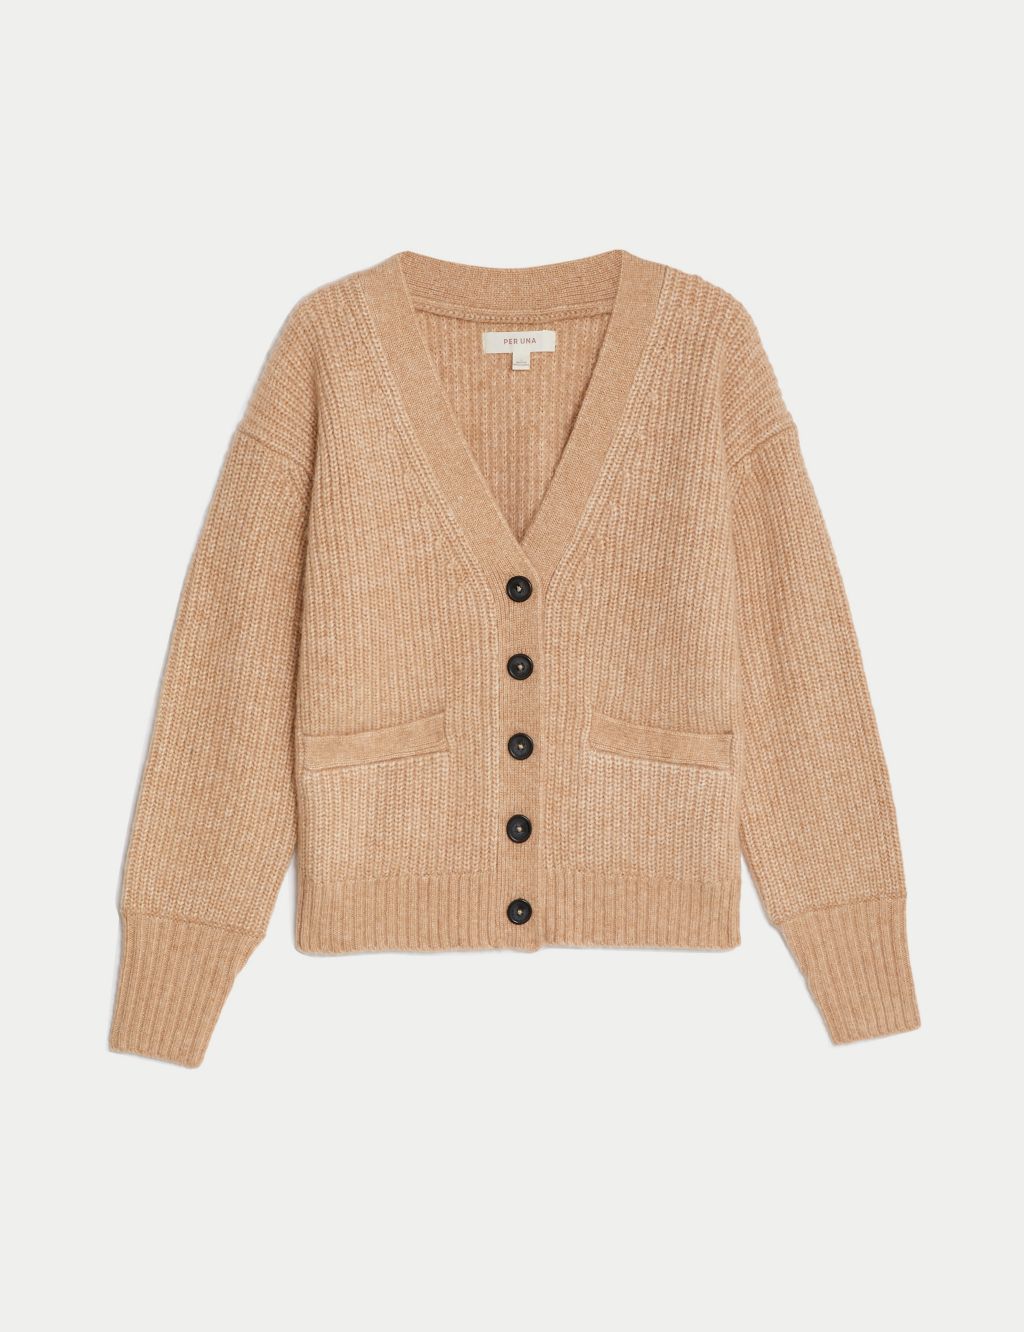 Knitted V-Neck Relaxed Cardigan with Wool image 2